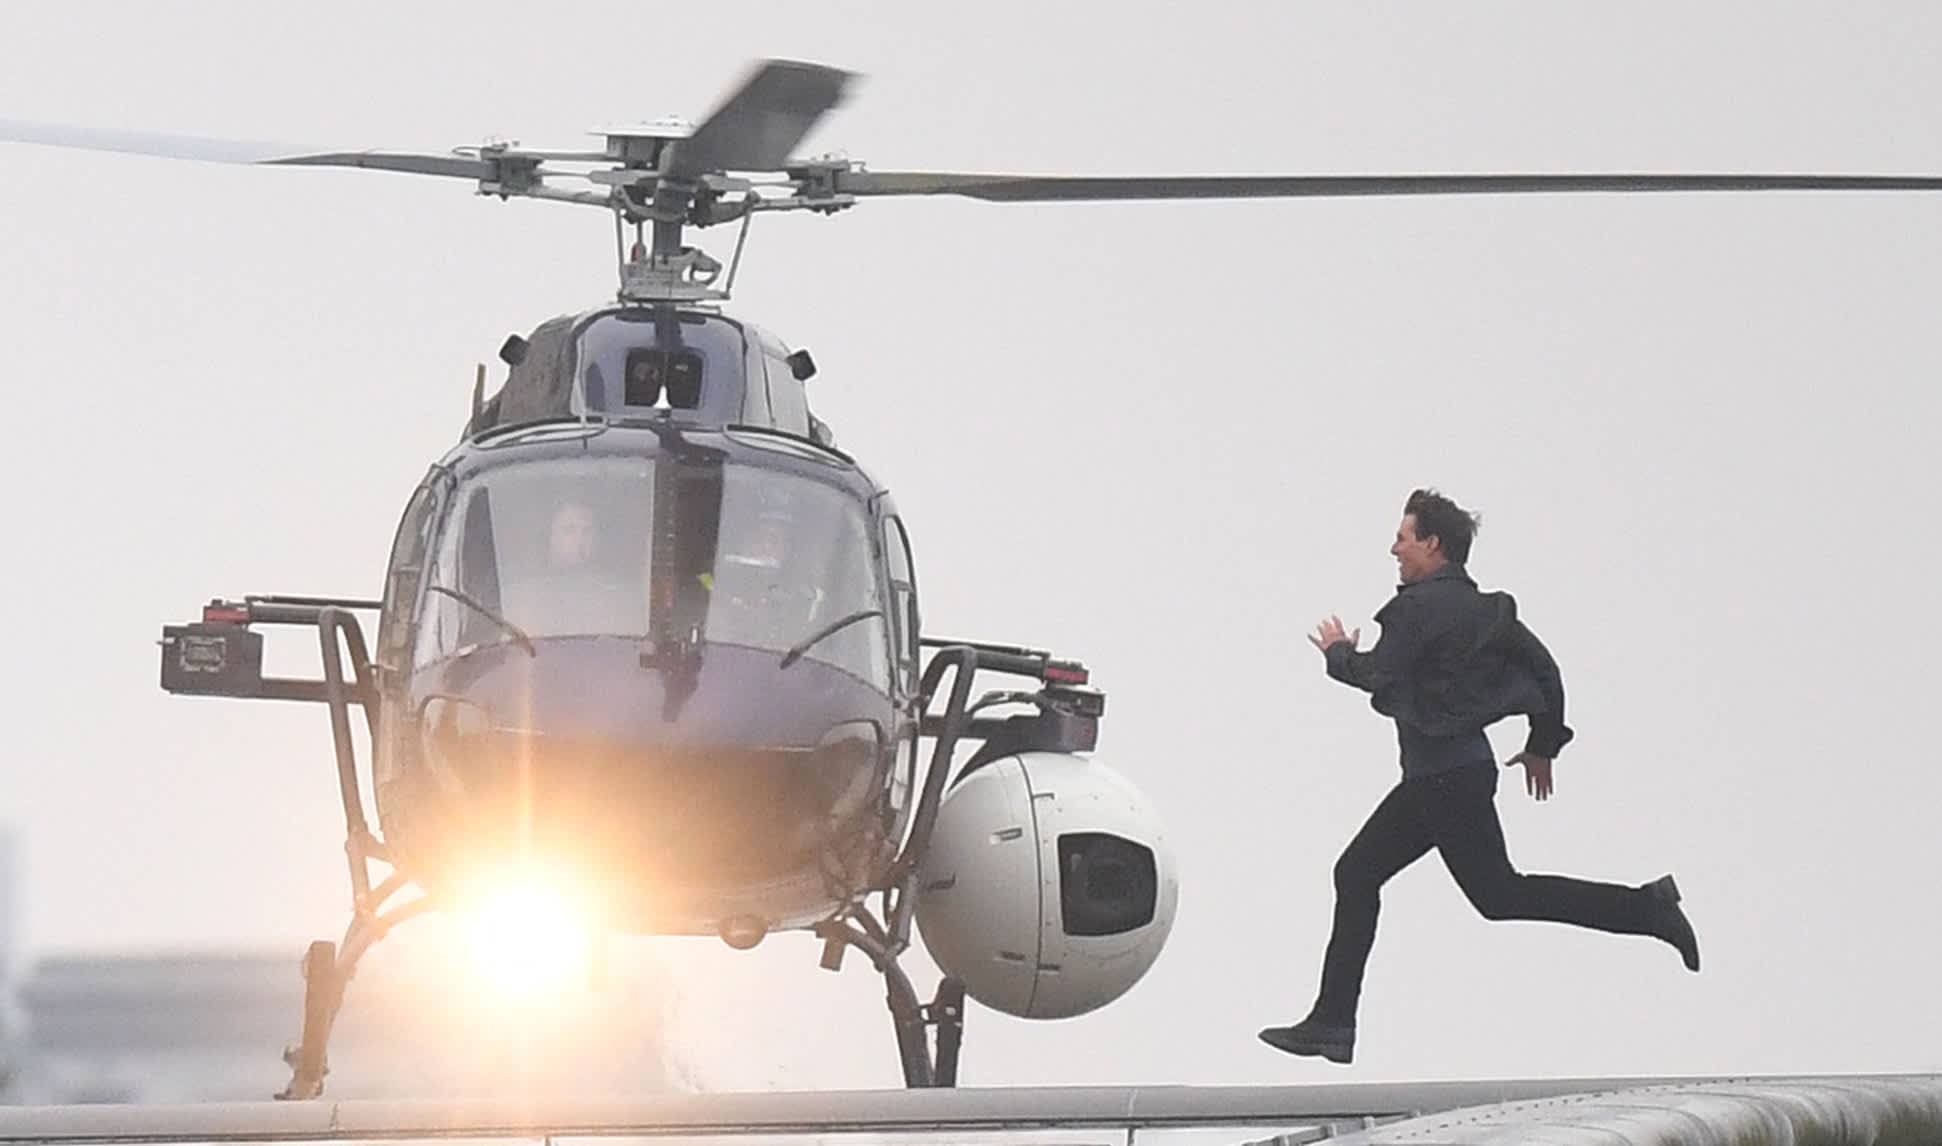 Tom Cruise’s ‘Mission Impossible 7’ and ‘8’ have been delayed